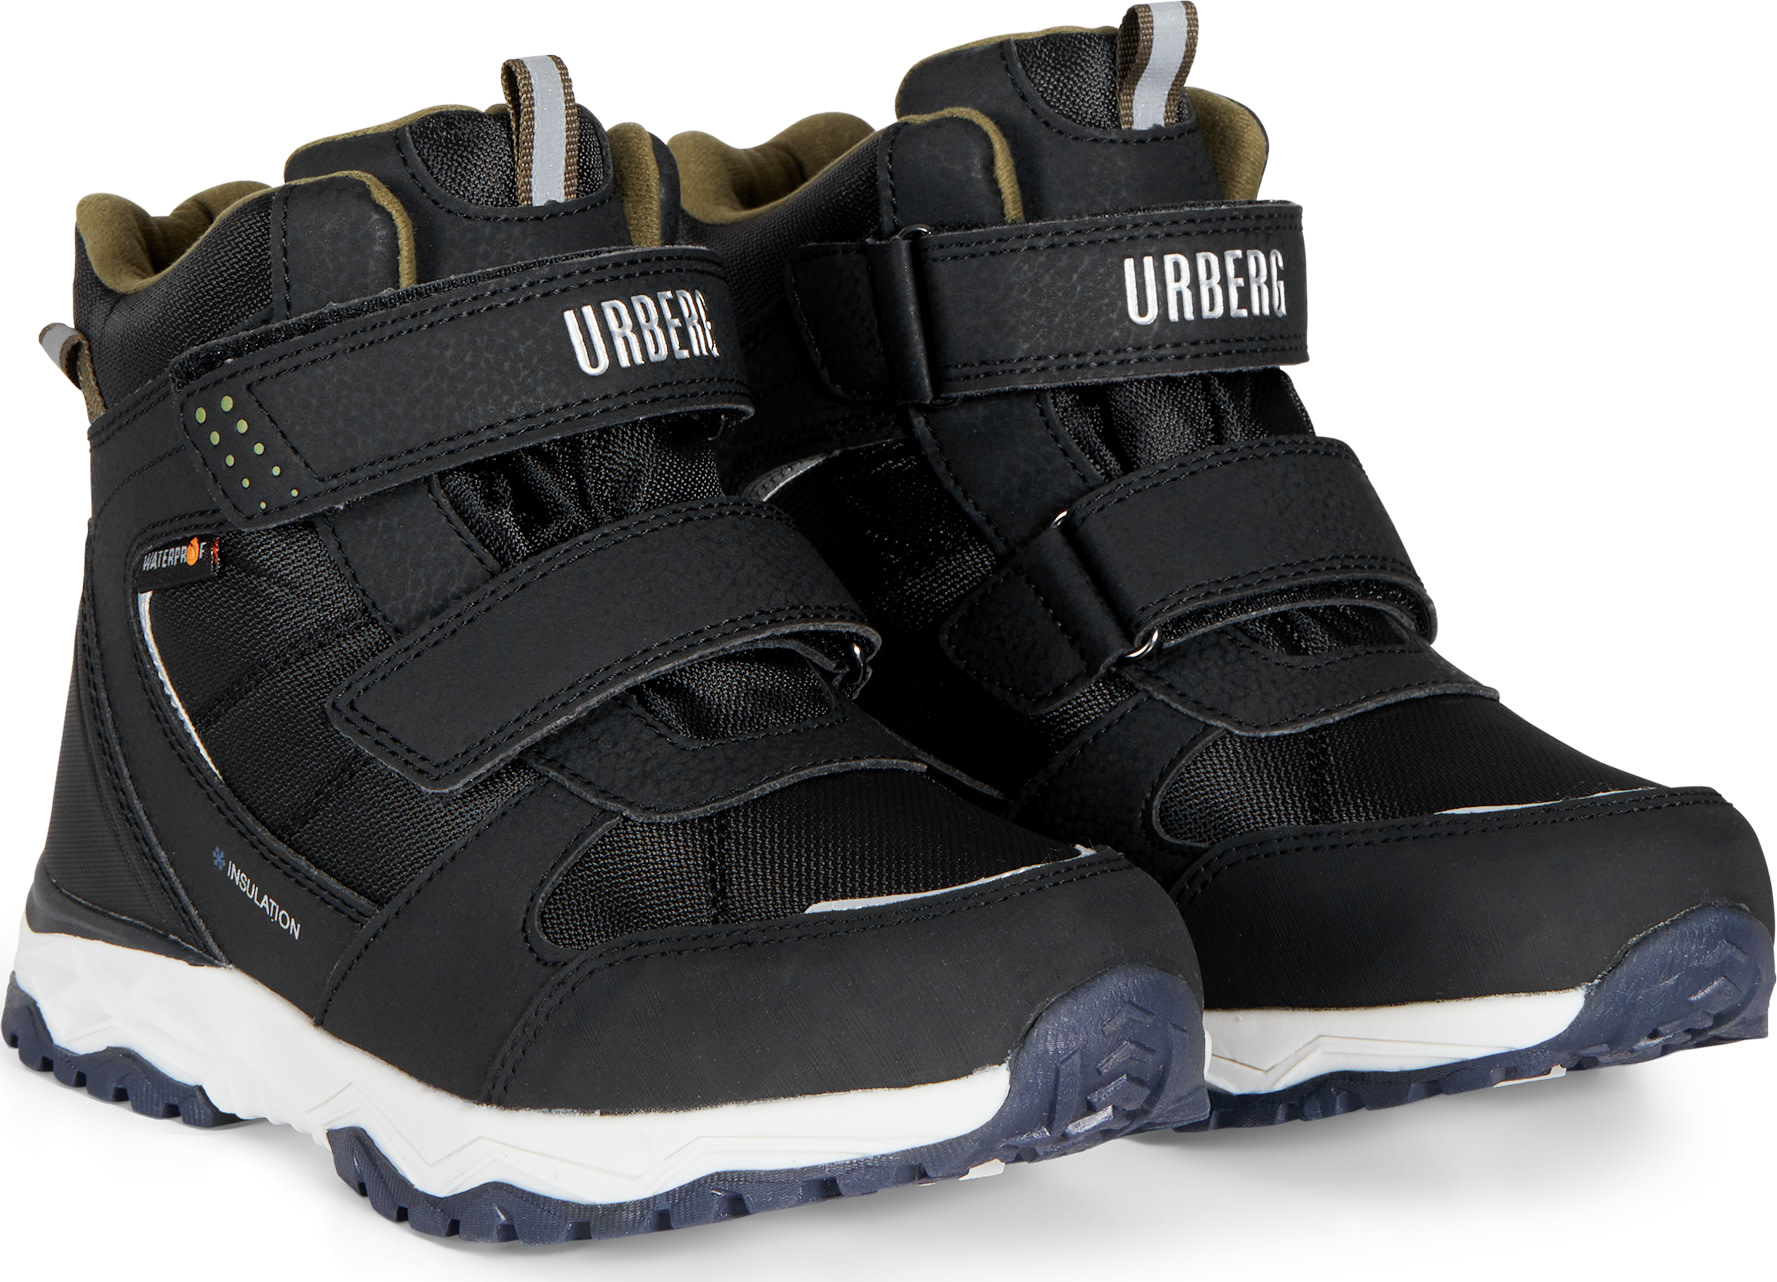 Urberg Kids’ Ice Boot Black Beauty/Capers